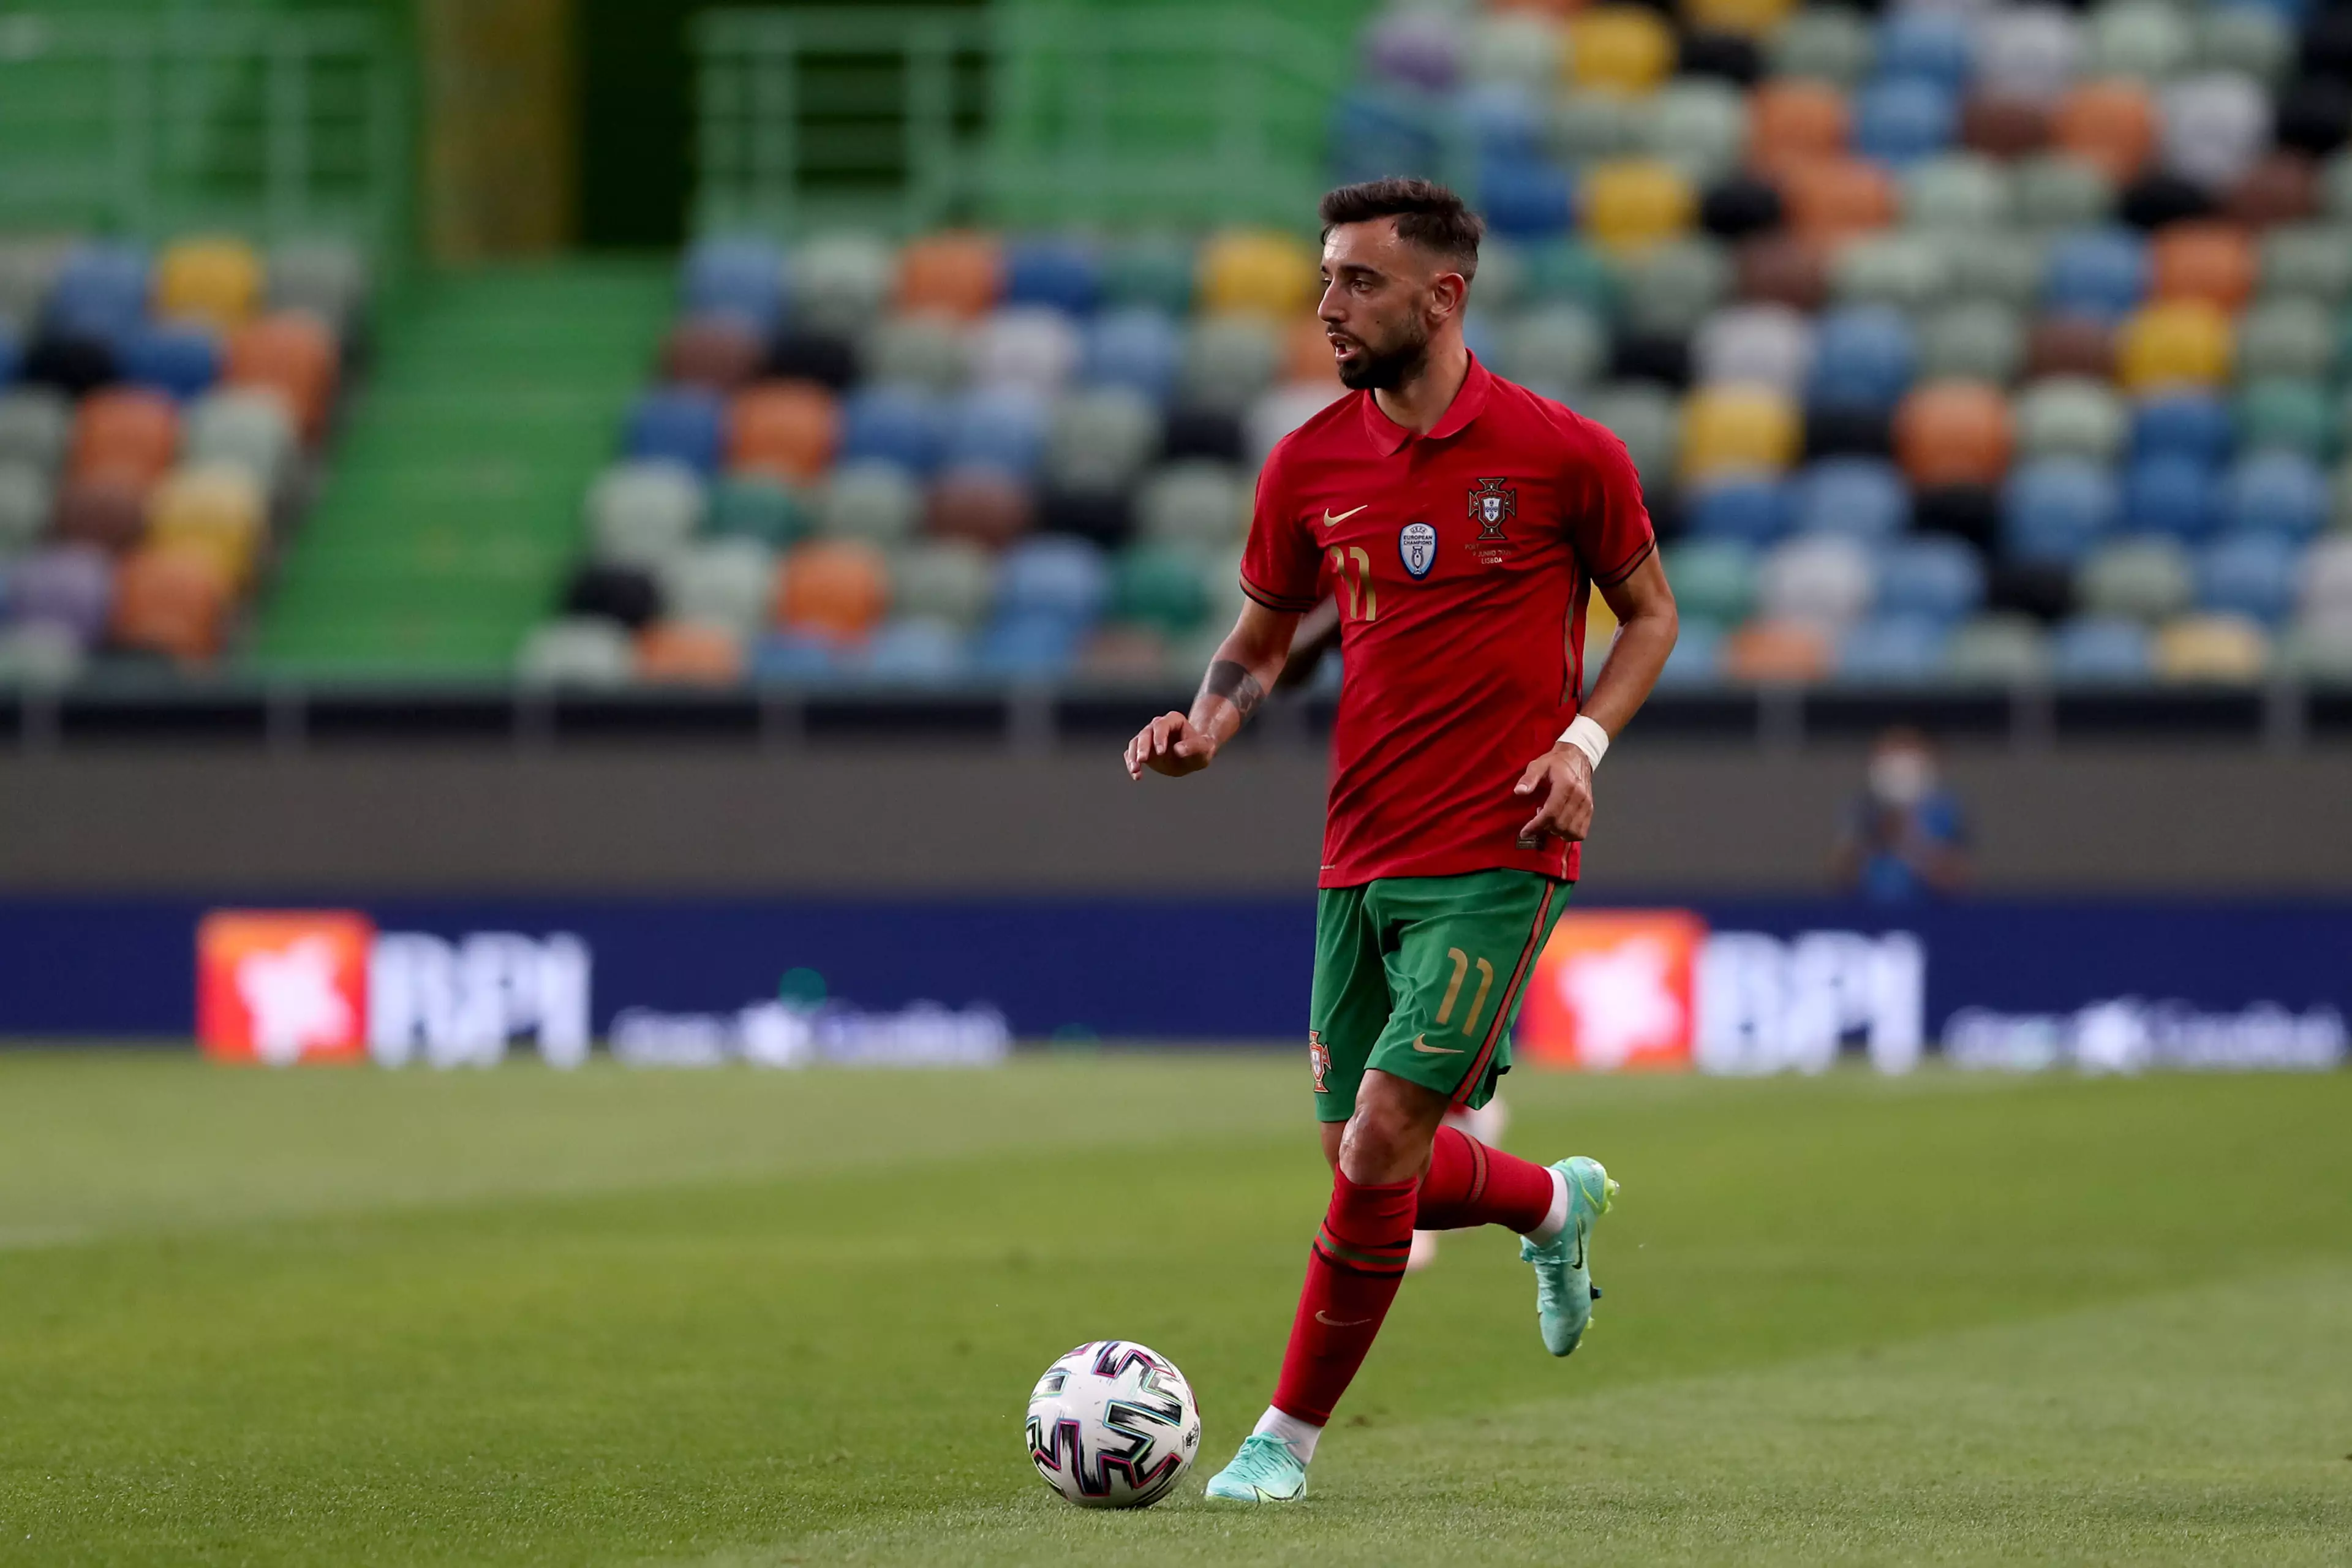 Bruno Fernandes looks primed and ready to run the show at Euro 2020